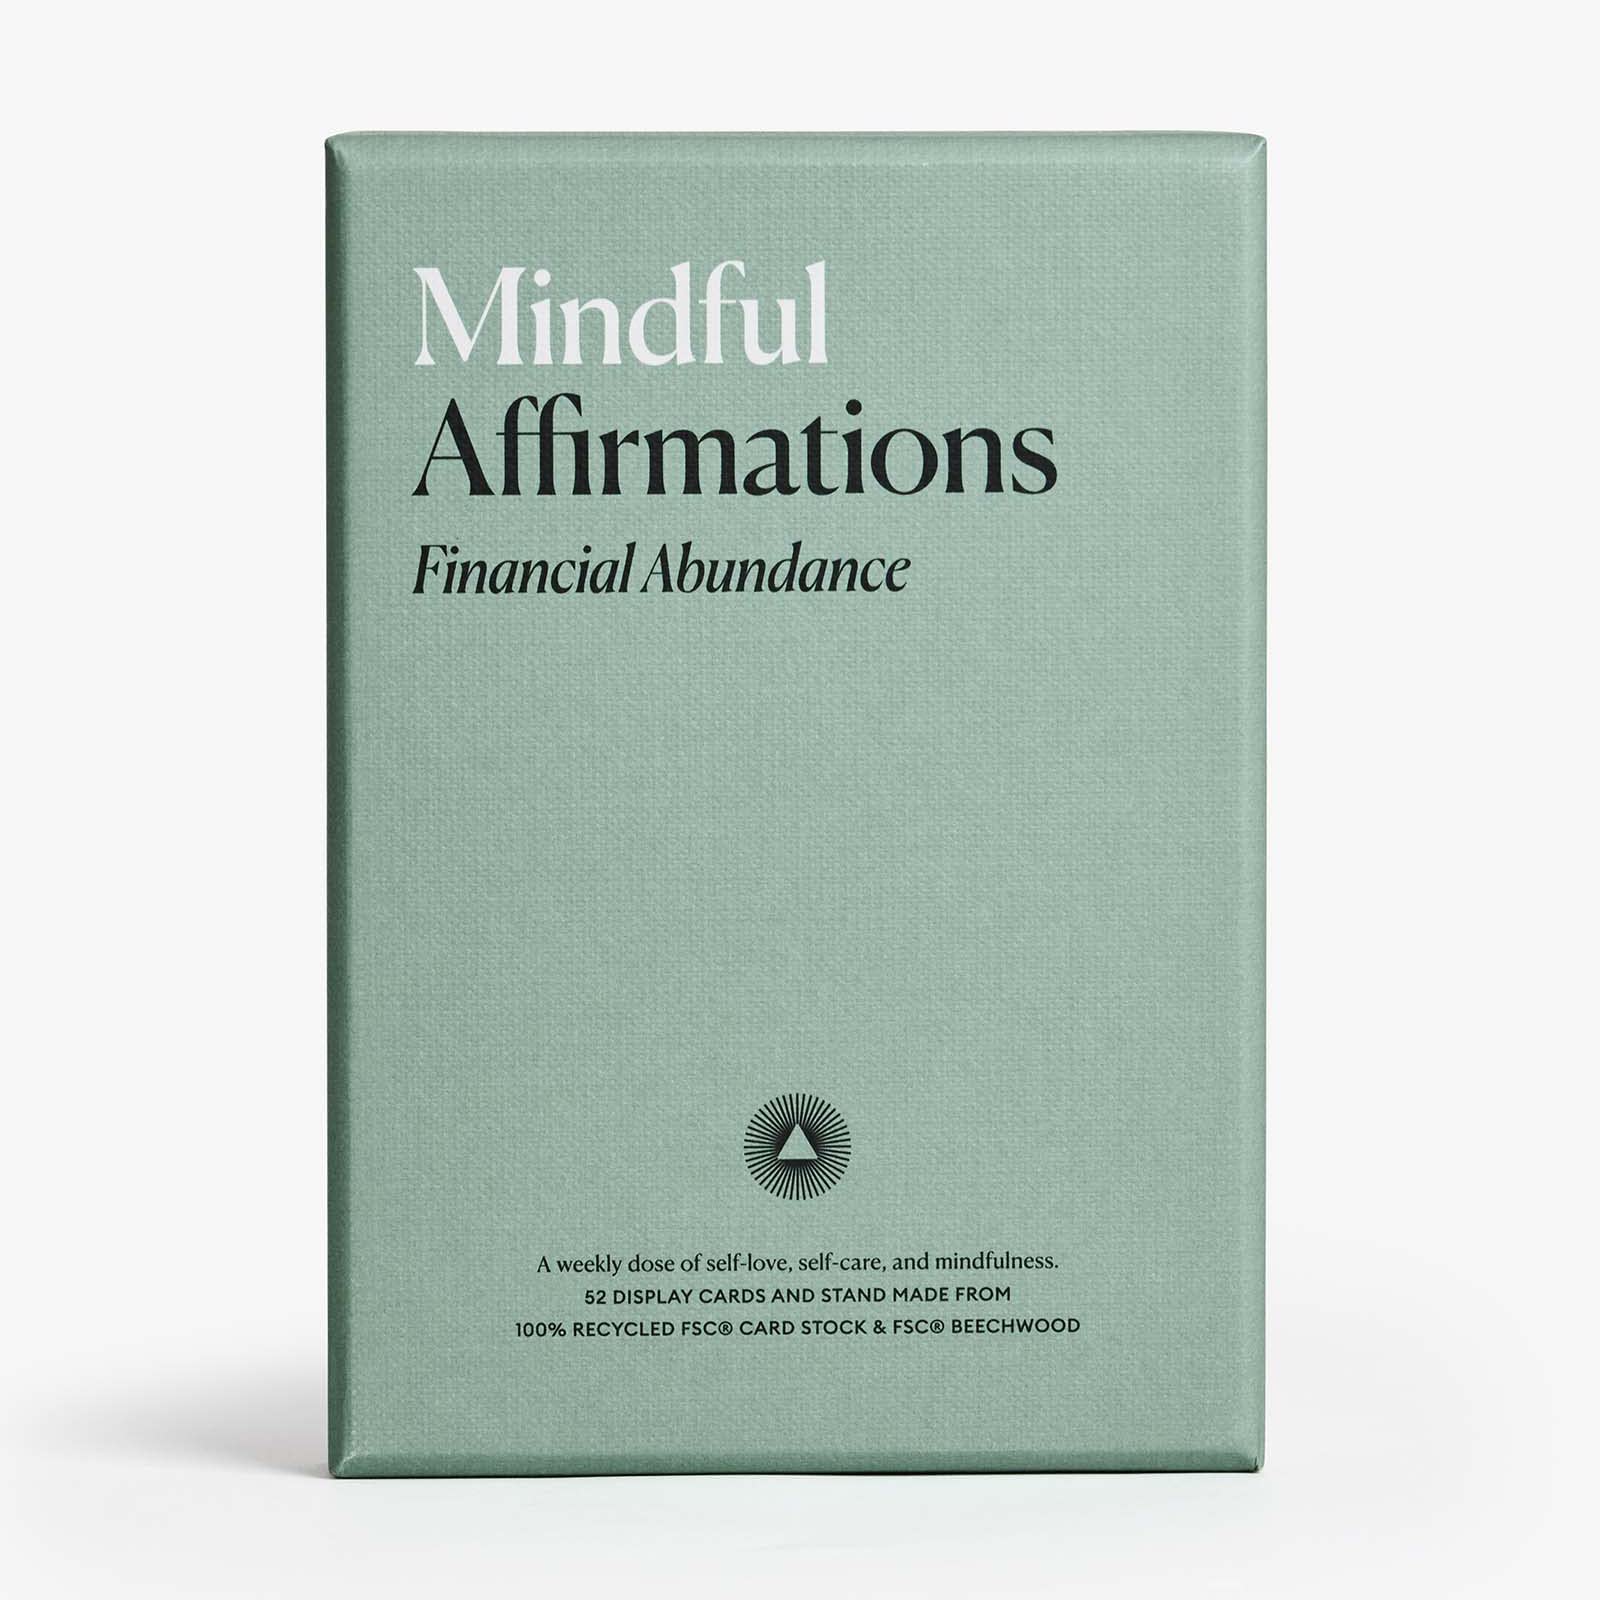 Mindful Affirmation Cards for Financial Abundance, Daily Words of Inspiration, Self Affirmation Inspirational Gifts, Positive Affirmations with Display Stand, Deck of 52 - Intelligent Change